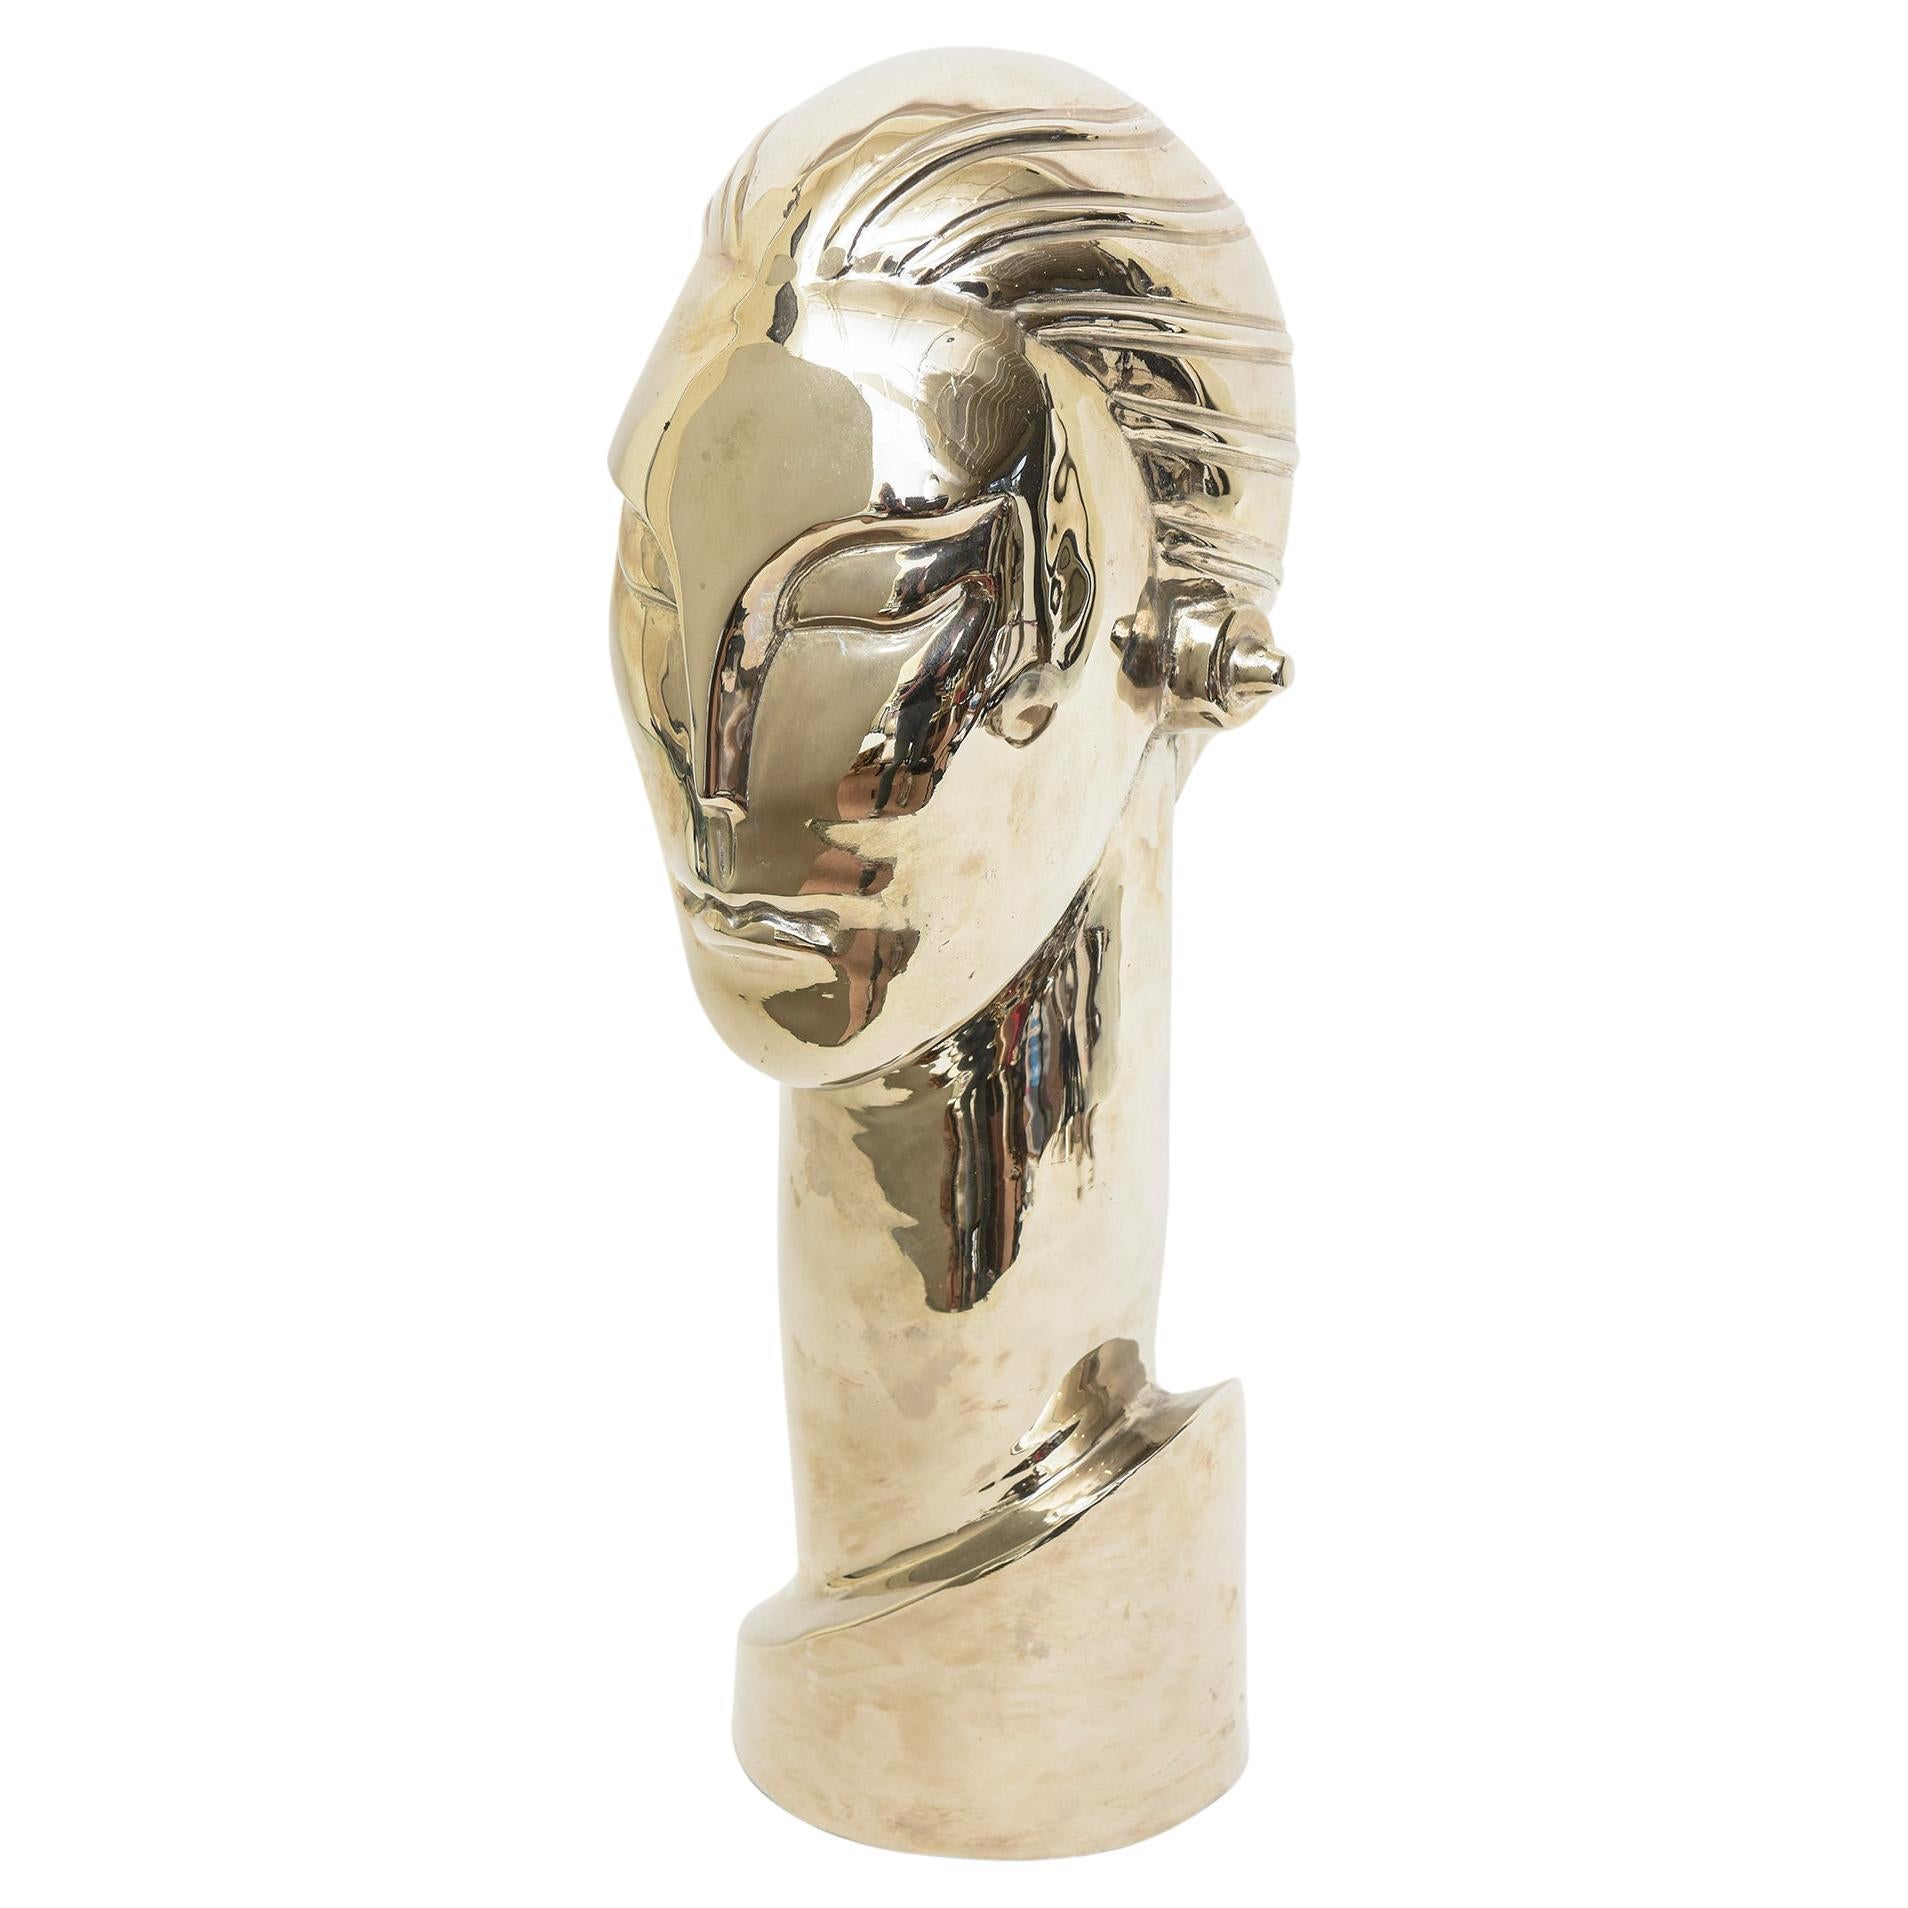 Nickel Silver Over Brass Art Deco Stylized Tall Head Bust Figurative Sculpture  For Sale